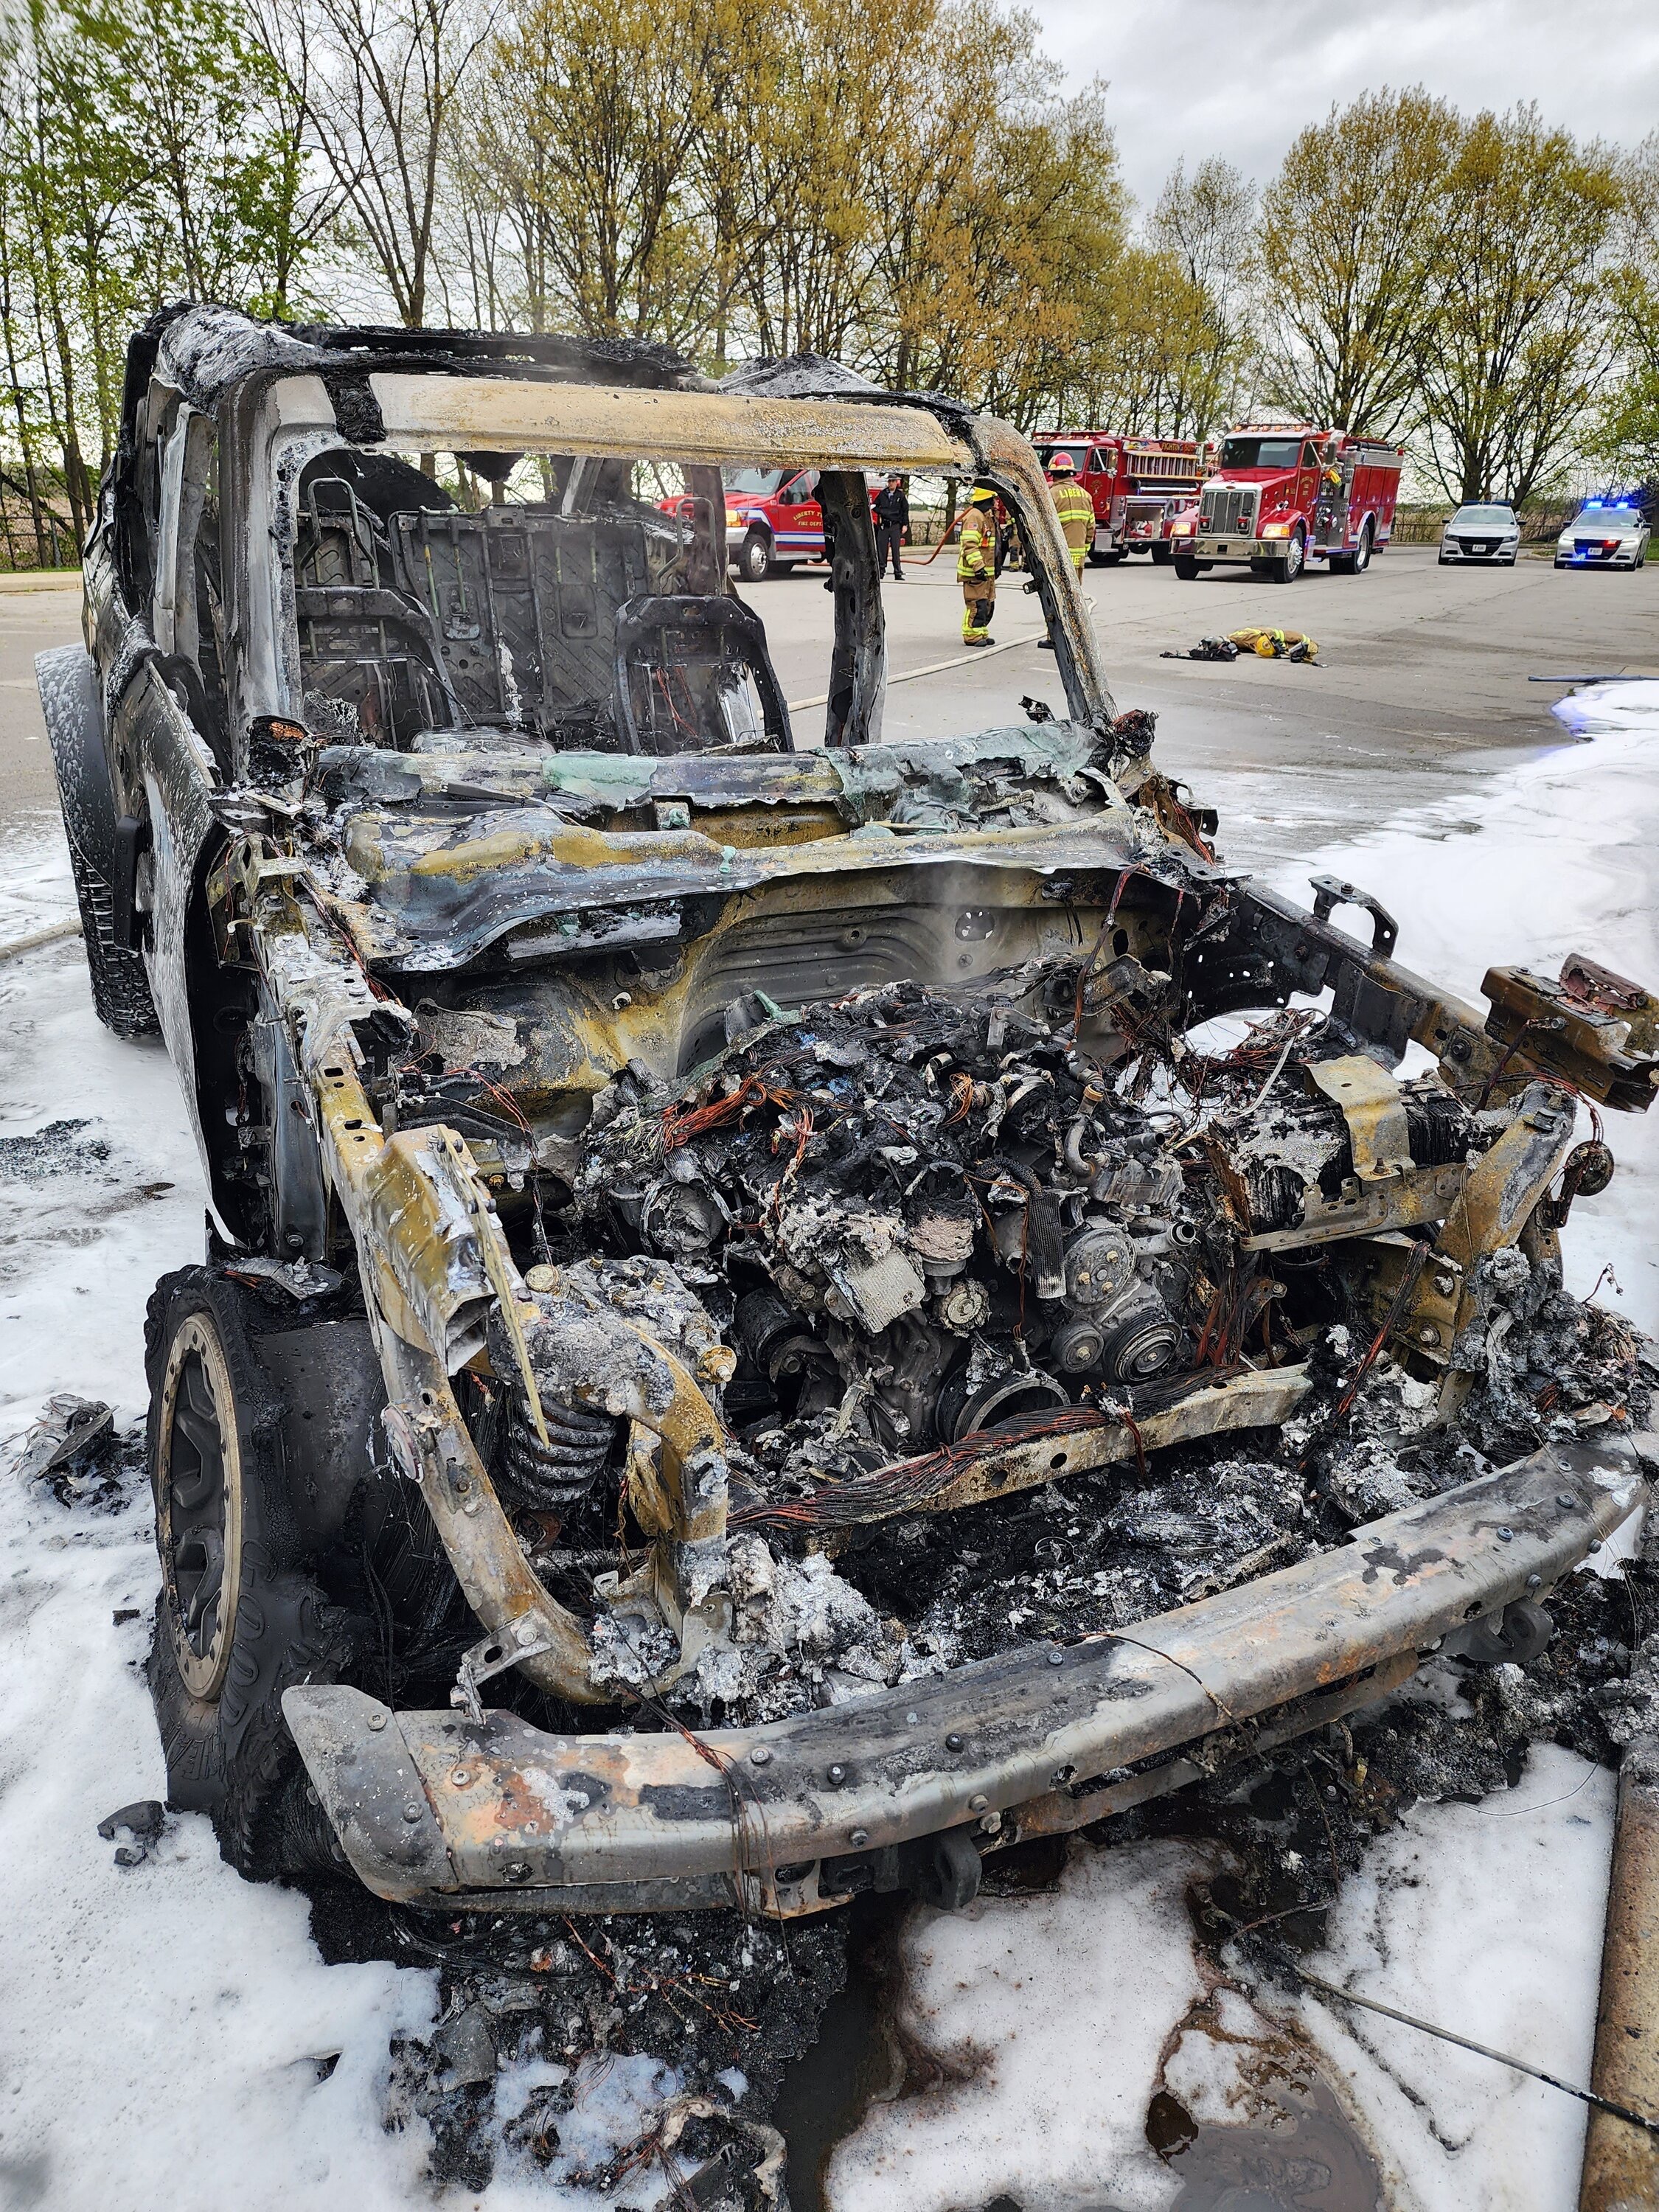 Ford Bronco Total loss... 🤦🏼‍♂️ Engine bay fire burned down my Bronco IMG_0008